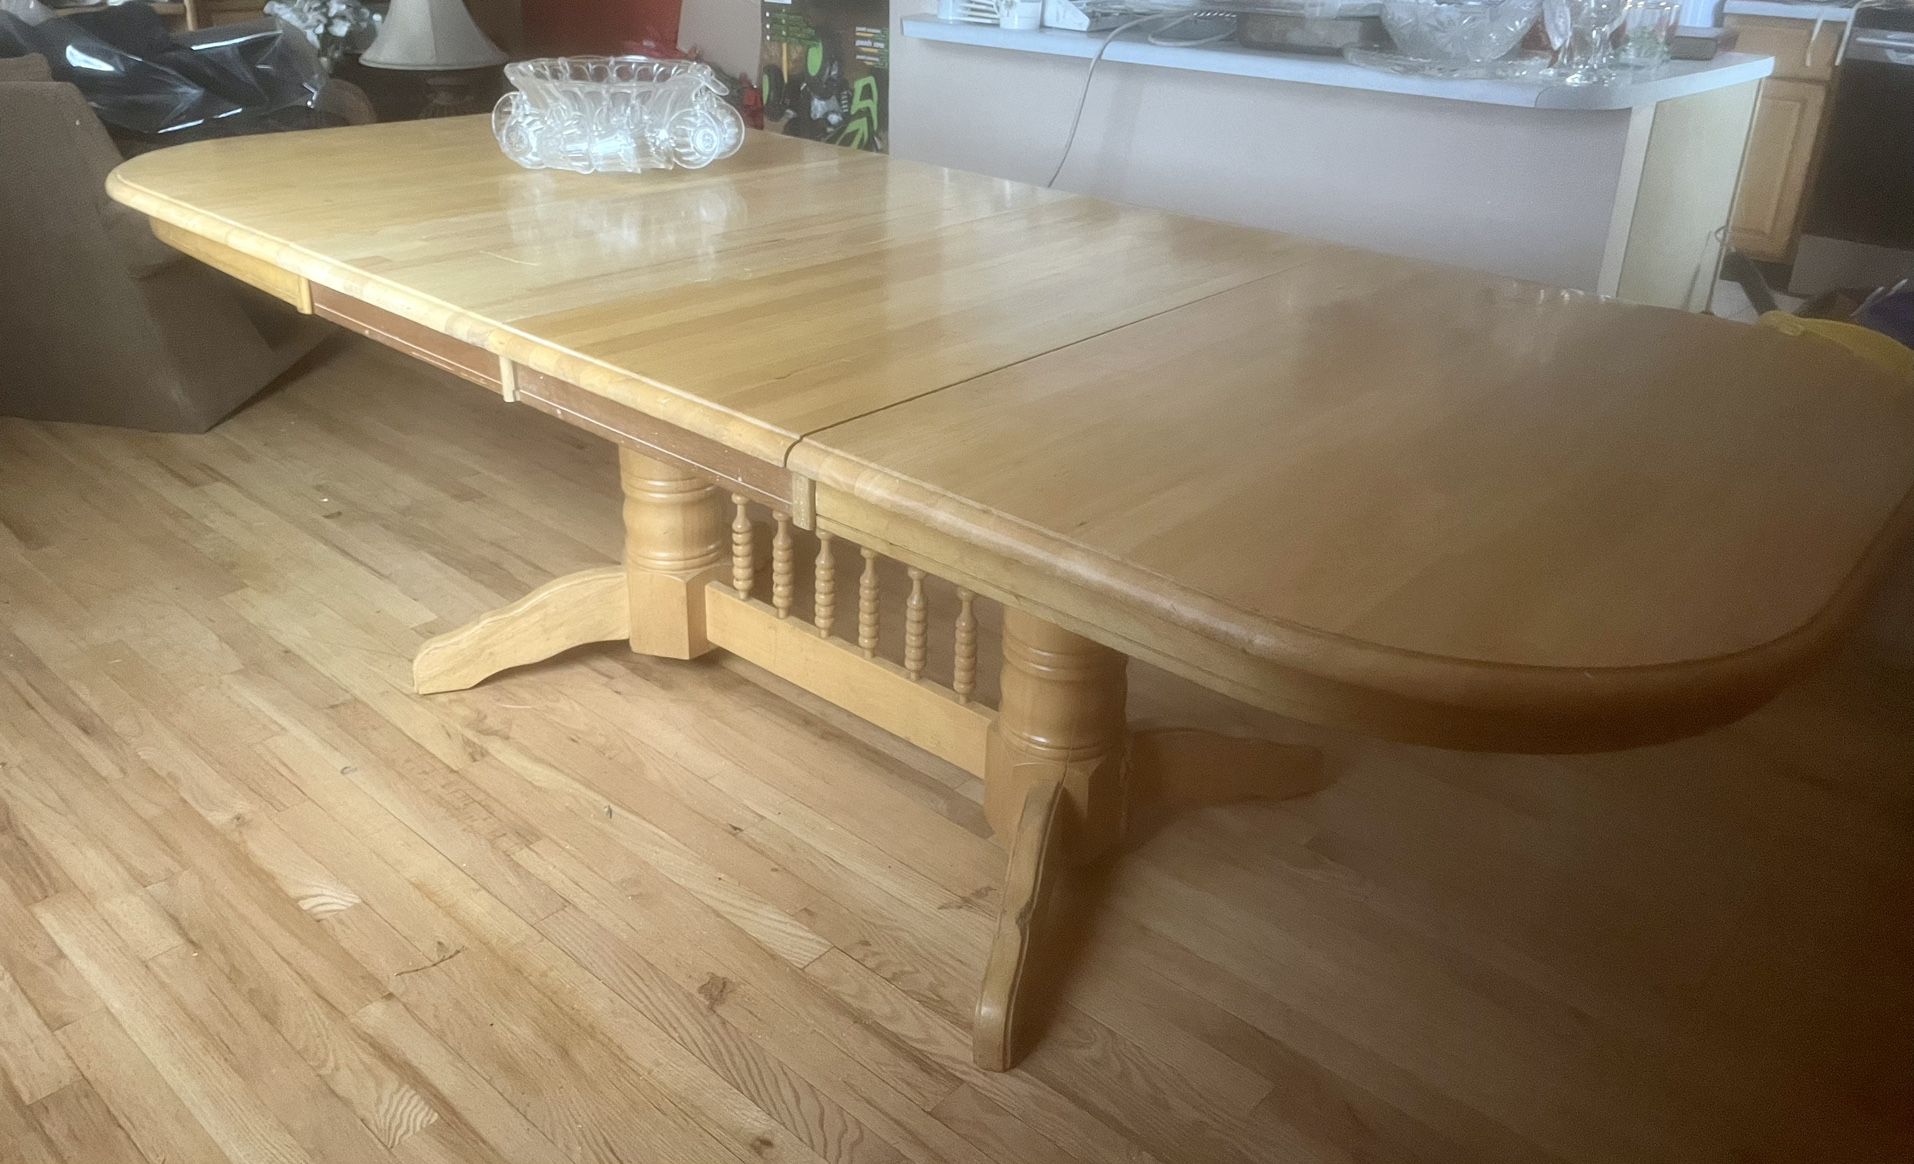 Large Oak Dining Table 8ft long with leafs 5ft without leafs and 42” wide